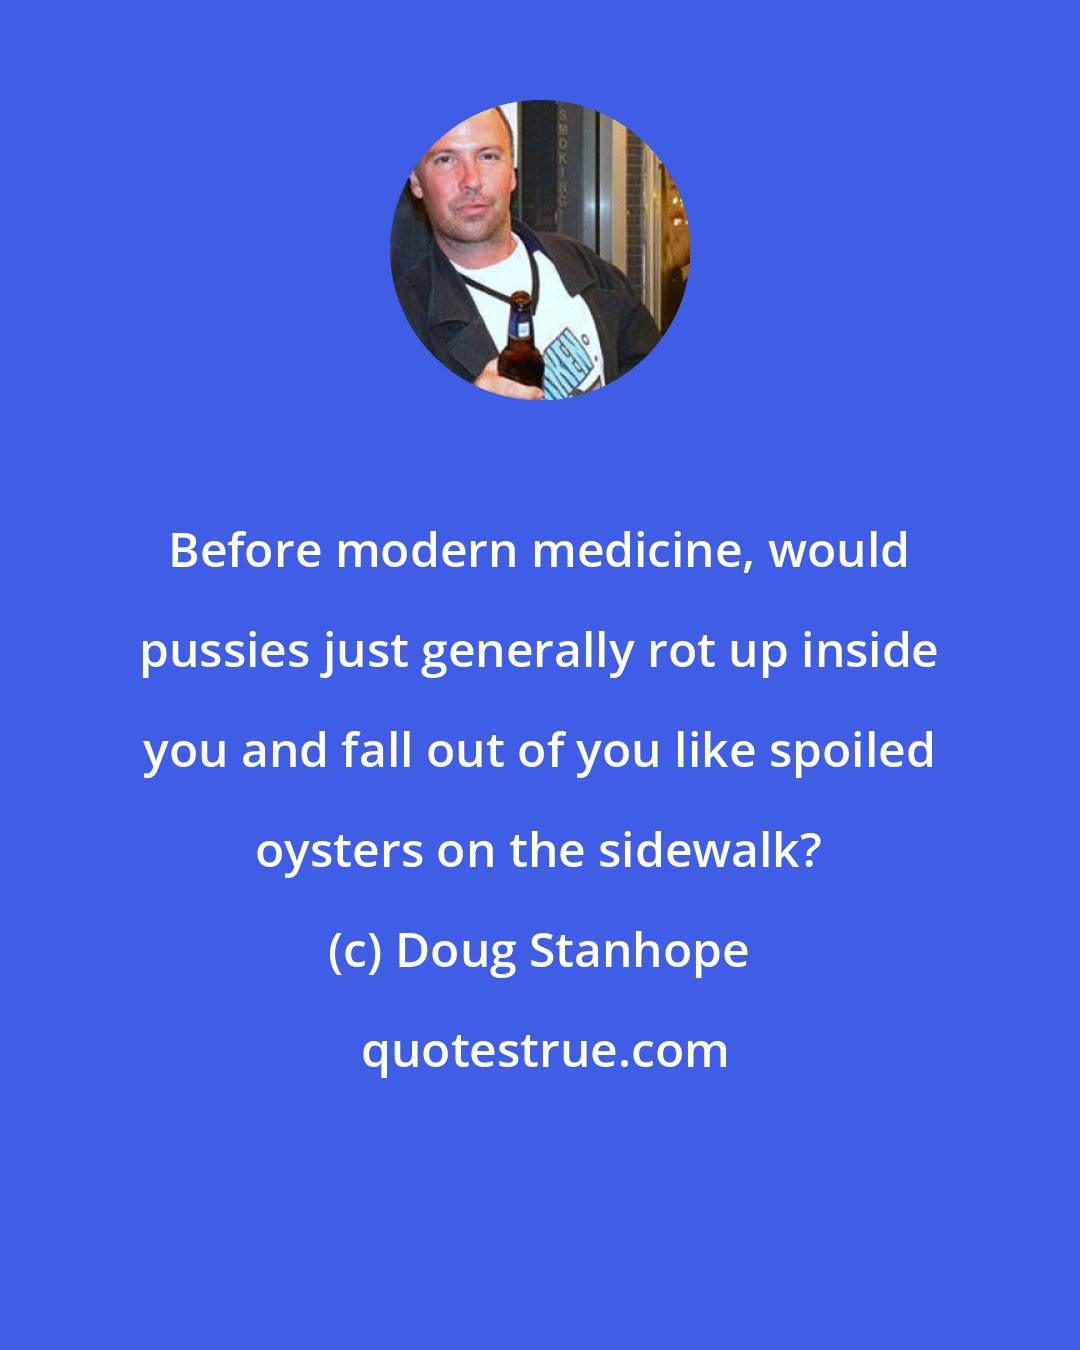 Doug Stanhope: Before modern medicine, would pussies just generally rot up inside you and fall out of you like spoiled oysters on the sidewalk?